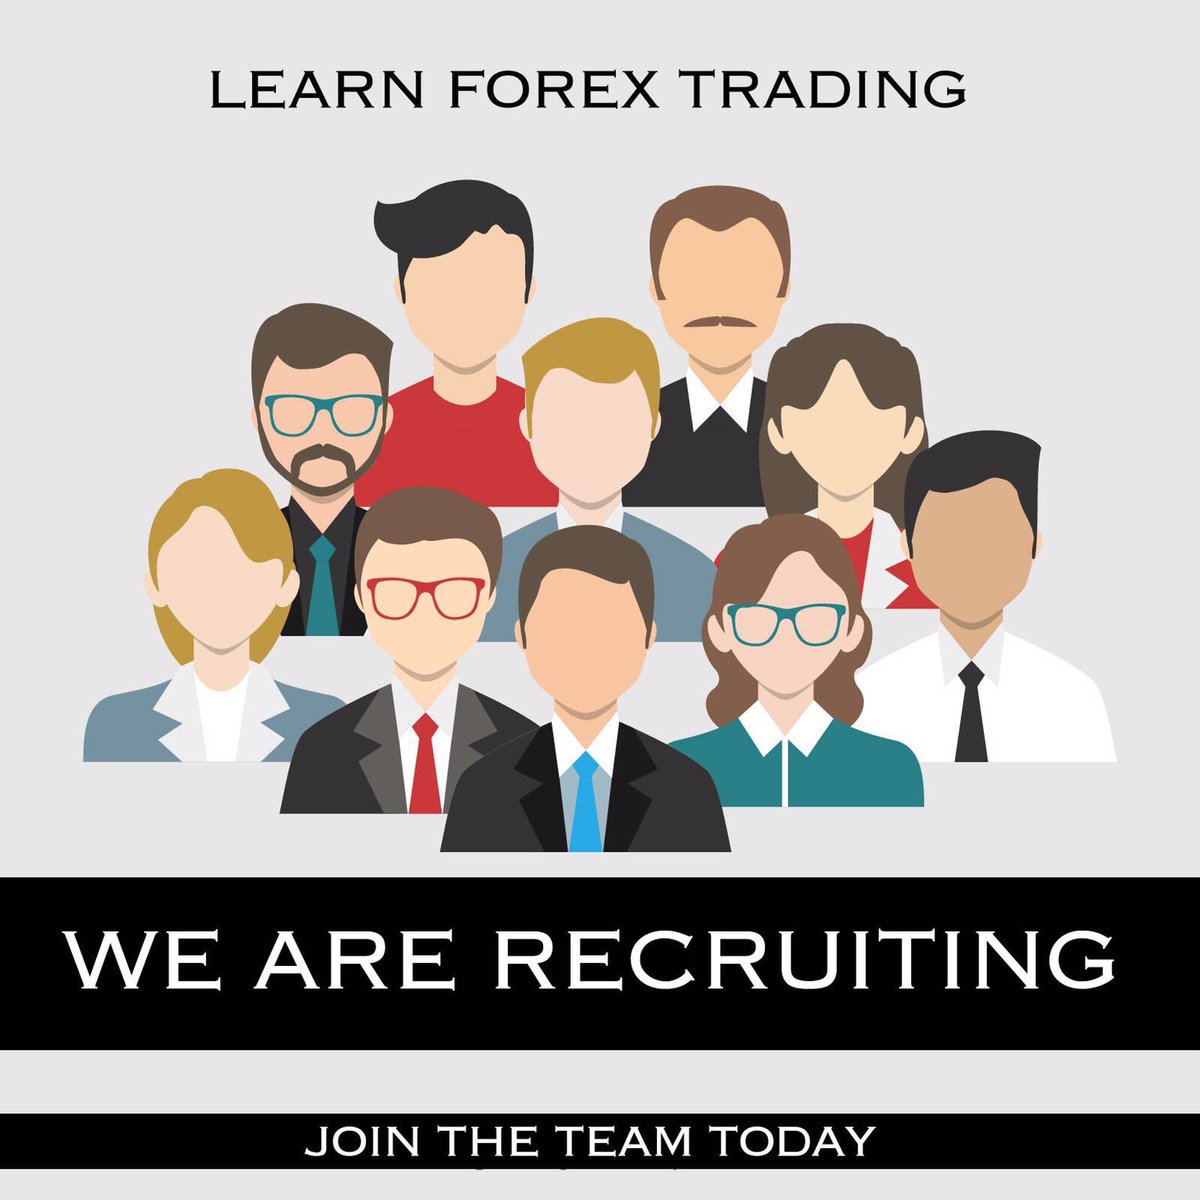 Best forex traders on twitter